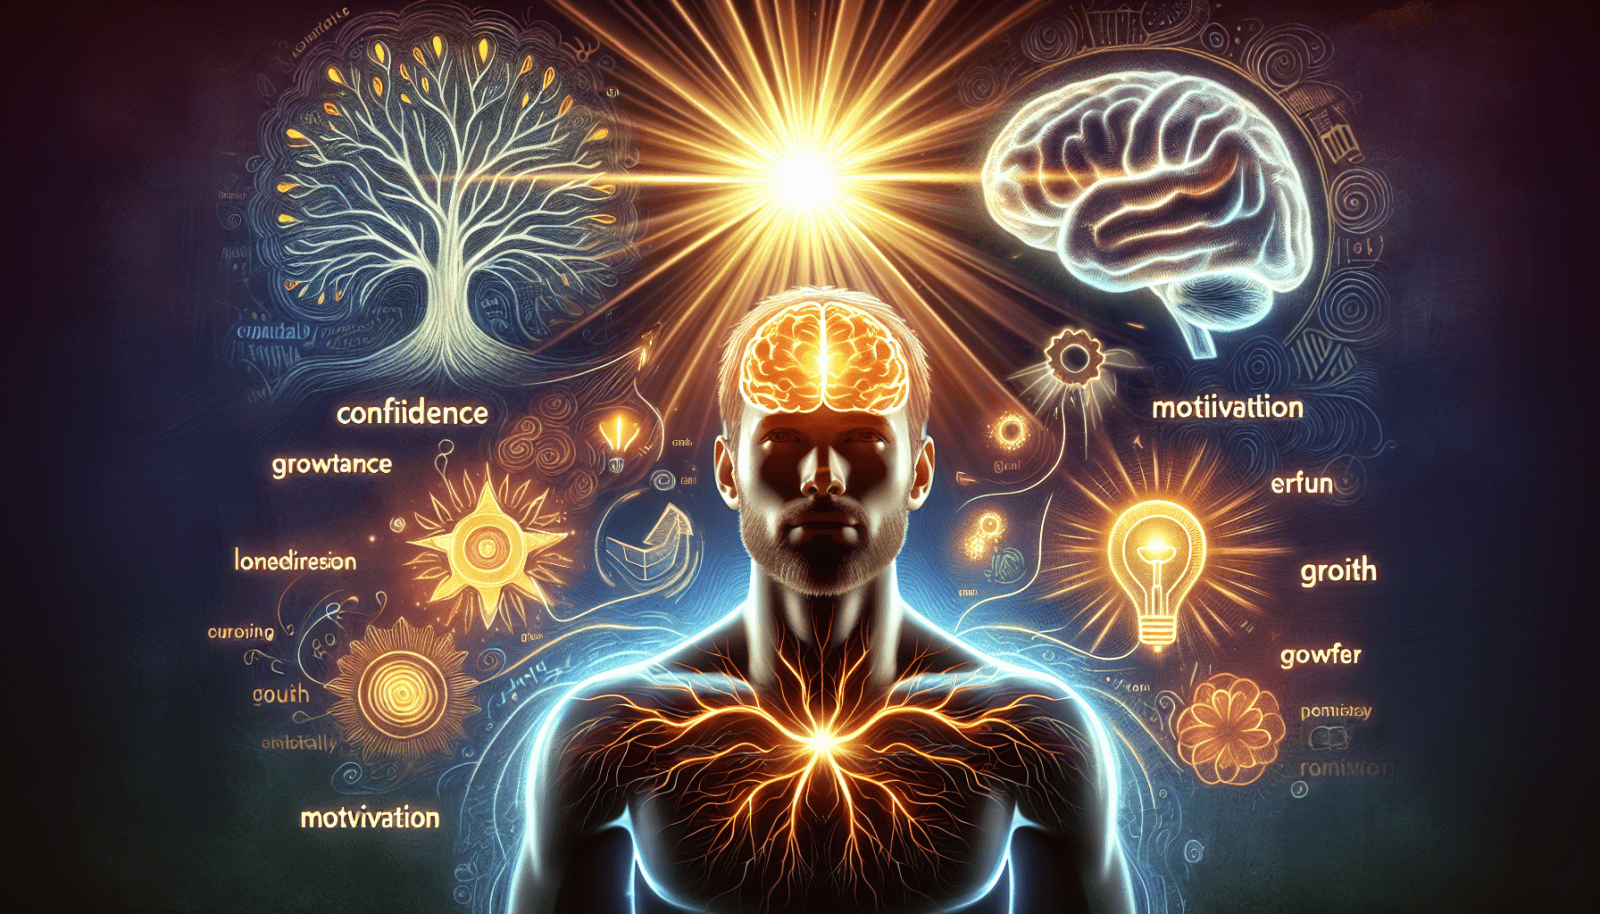 A digital artwork of a human figure with a glowing brain connected by light to the heart, surrounded by symbolic illustrations representing various concepts including a tree, sun, brain, and lightbulb, with words like "confidence," "growth," and "motivation" scattered throughout.